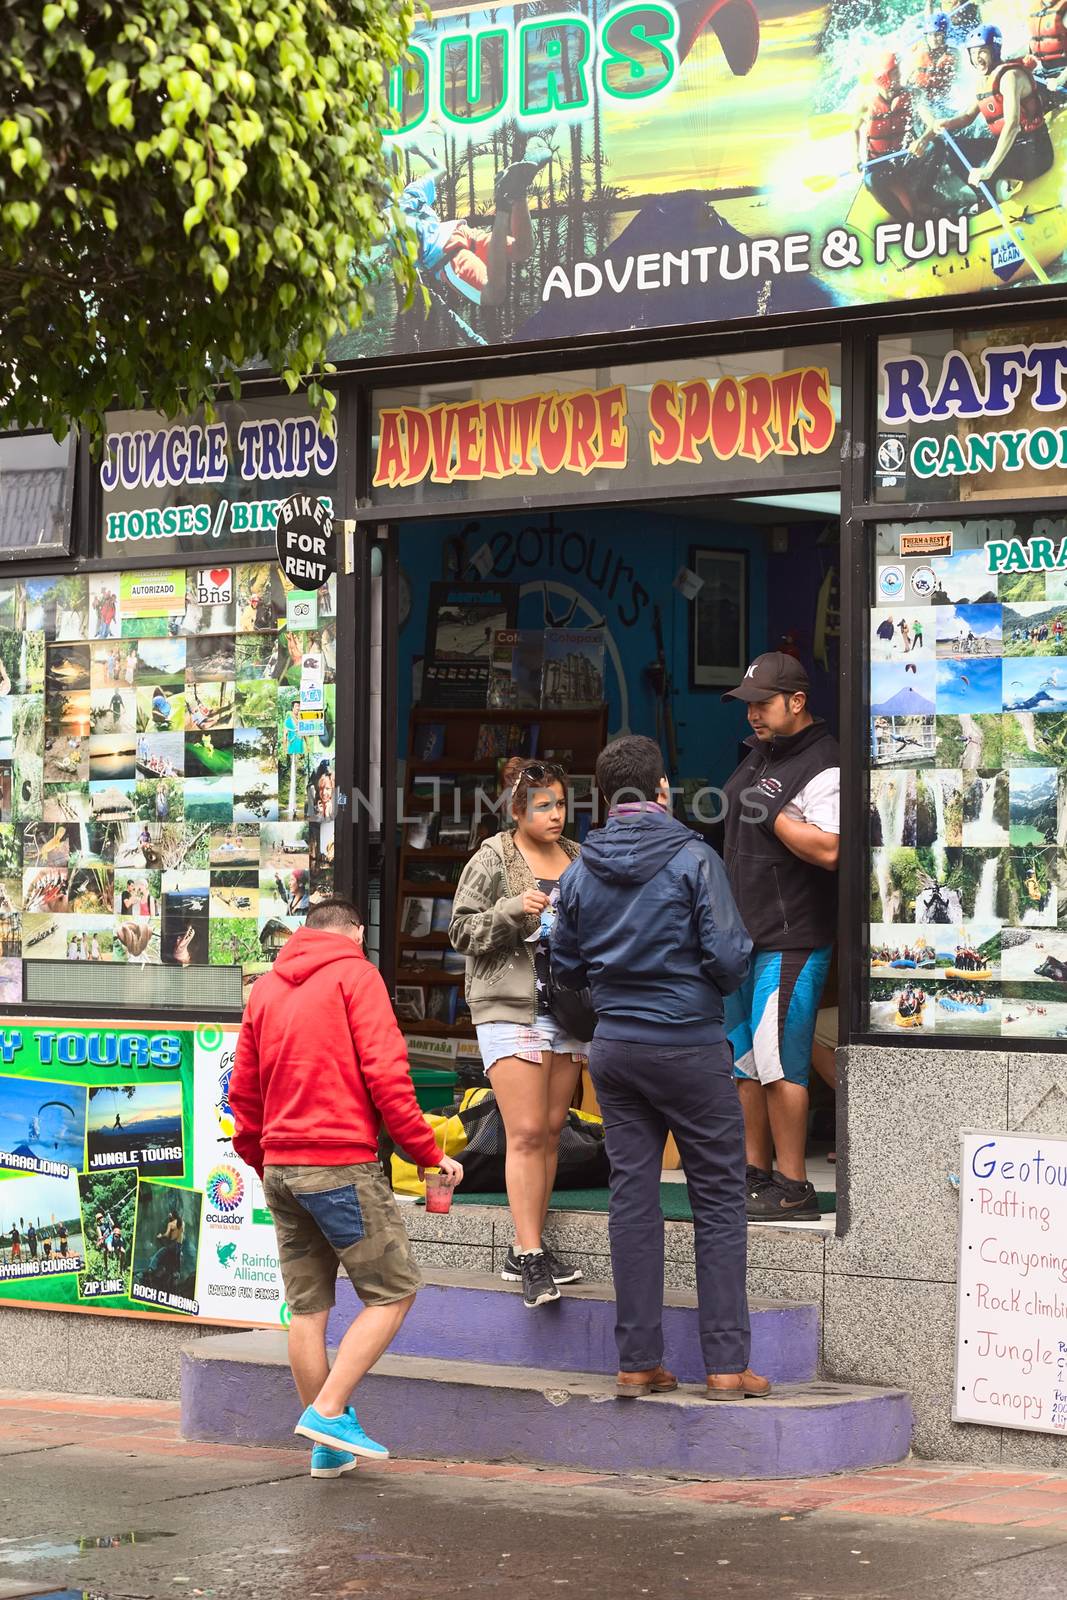 BANOS, ECUADOR - FEBRUARY 25, 2014: Unidentified people at Geotours travel agency and tour operator on Ambato Street on February 25, 2014 in Banos, Ecuador. Banos is a small touristy town, which is known for its various outdoor activities and where numerous travel agencies and tour operators can be found. 